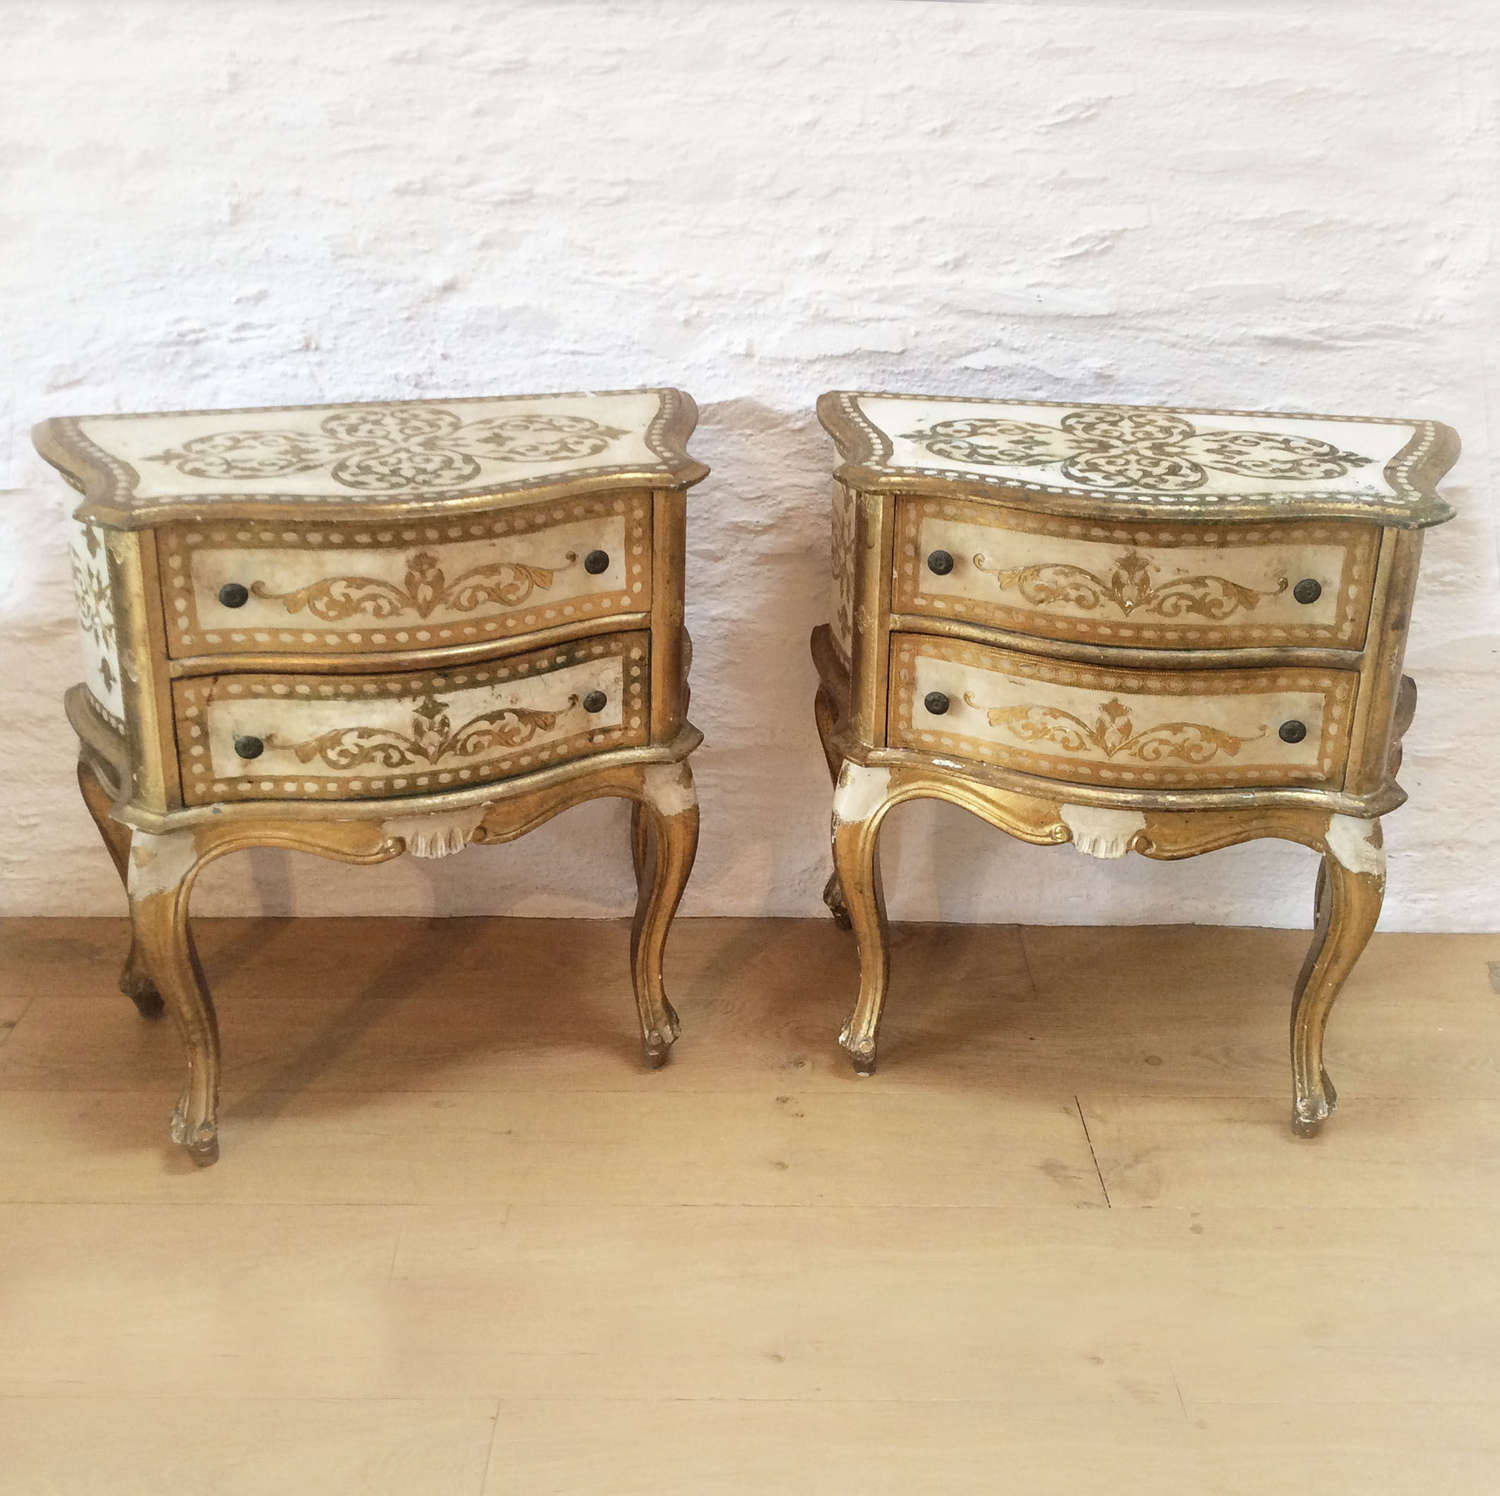 Pair of Venetian Gilt bedside chests of drawers